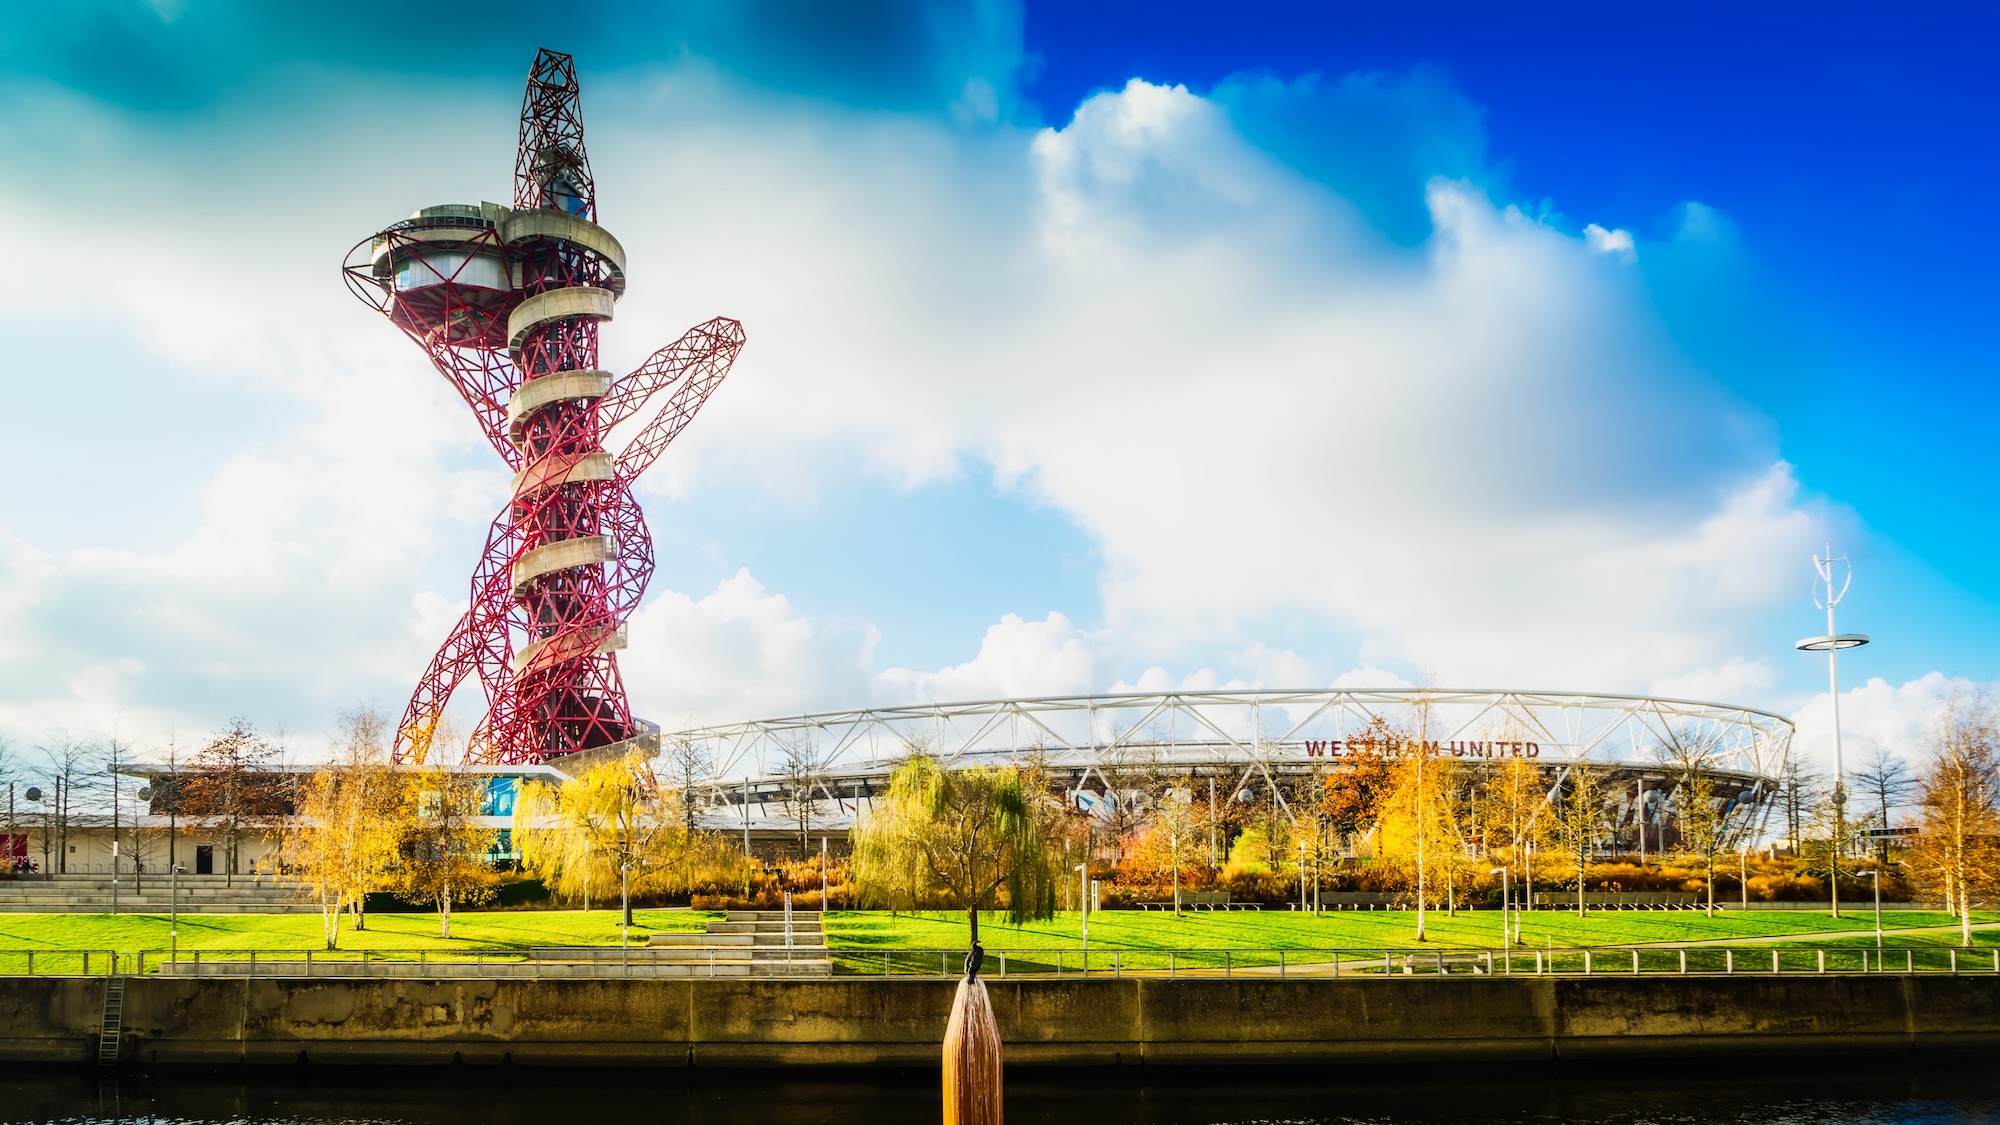 ArcelorMittal Orbit and The Slide, courtesy of Queen Elizabeth Olympic Park